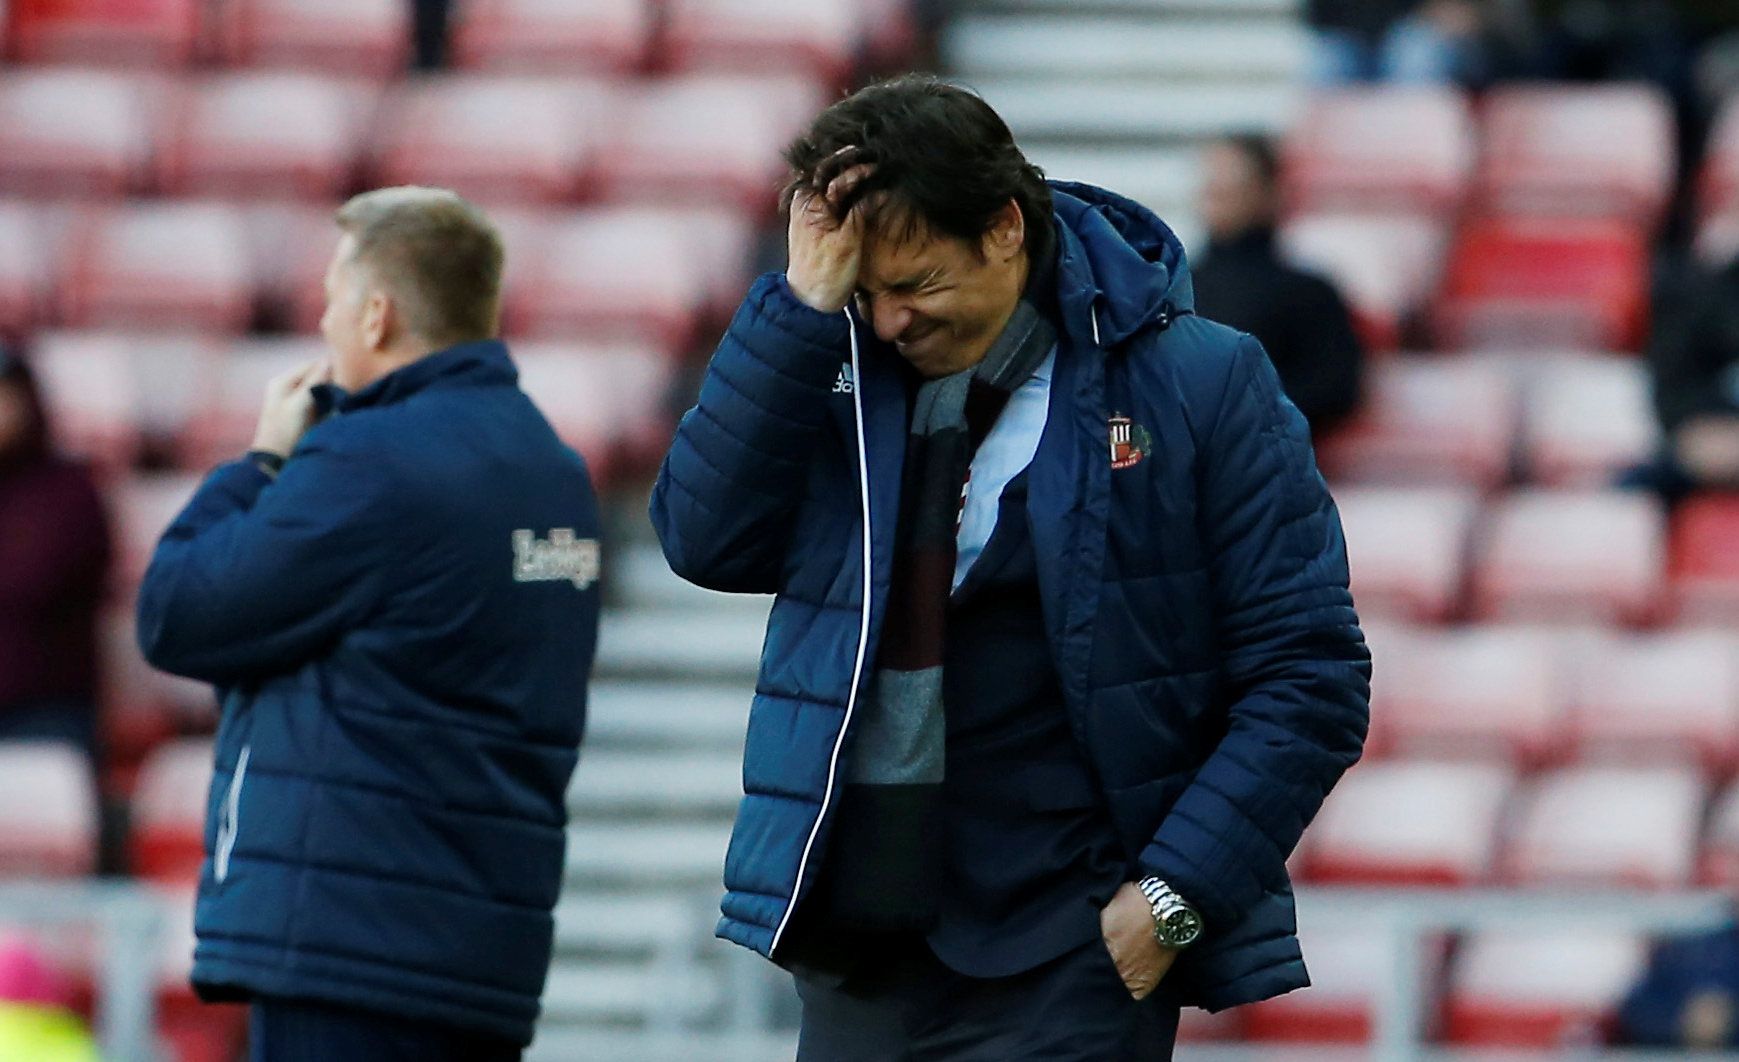 Soccer Football - Championship - Sunderland vs Brentford - Stadium of Light, Sunderland, Britain - February 17, 2018   Sunderland manager Chris Coleman reacts   Action Images/Craig Brough    EDITORIAL USE ONLY. No use with unauthorized audio, video, data, fixture lists, club/league logos or 